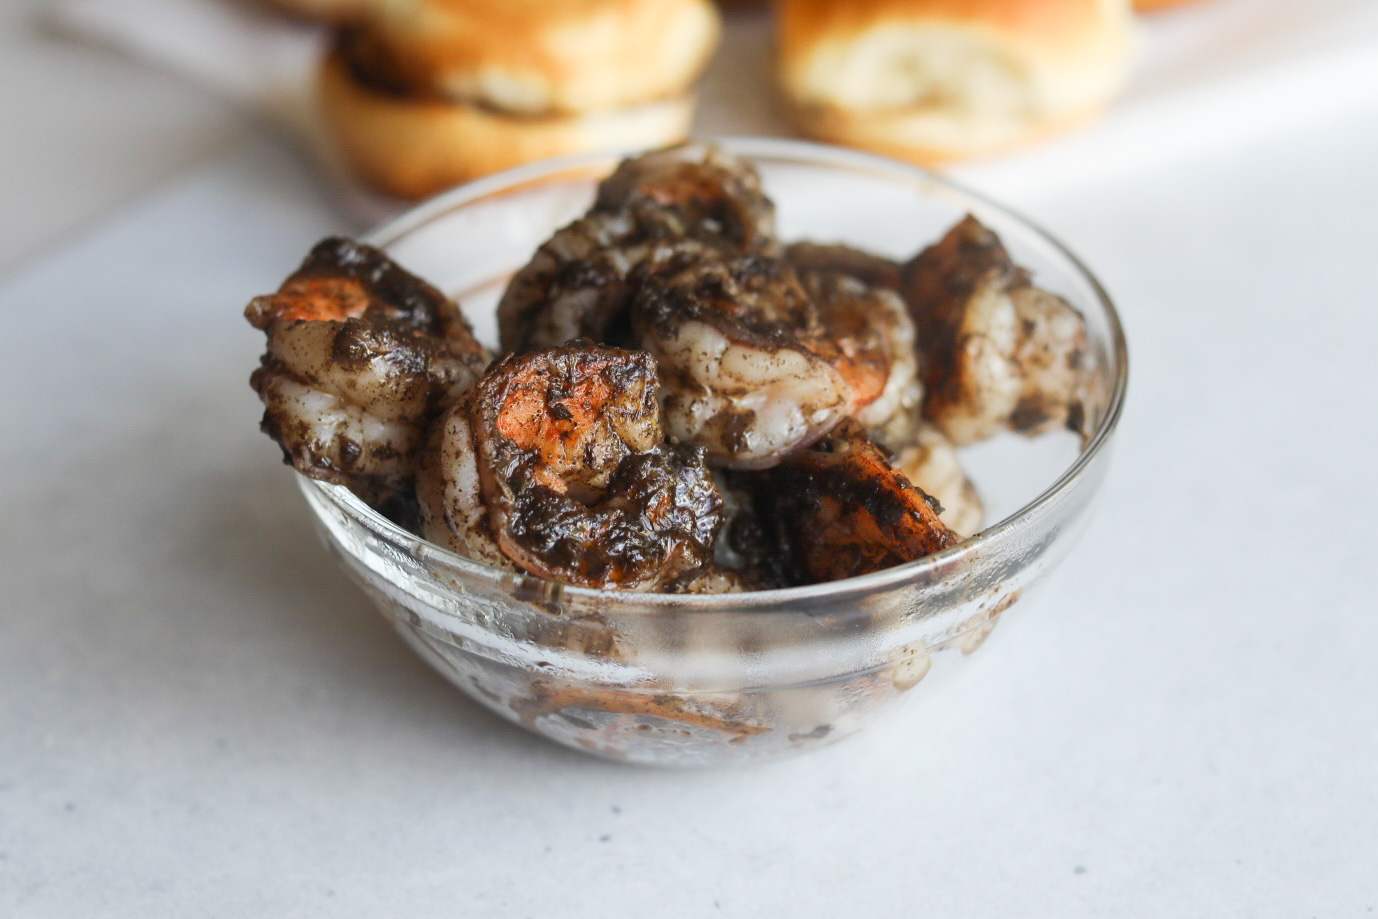 Jerk shrimp cooked with marinade in a small glass bowl cooling off. Slider buns out of focus in the background.